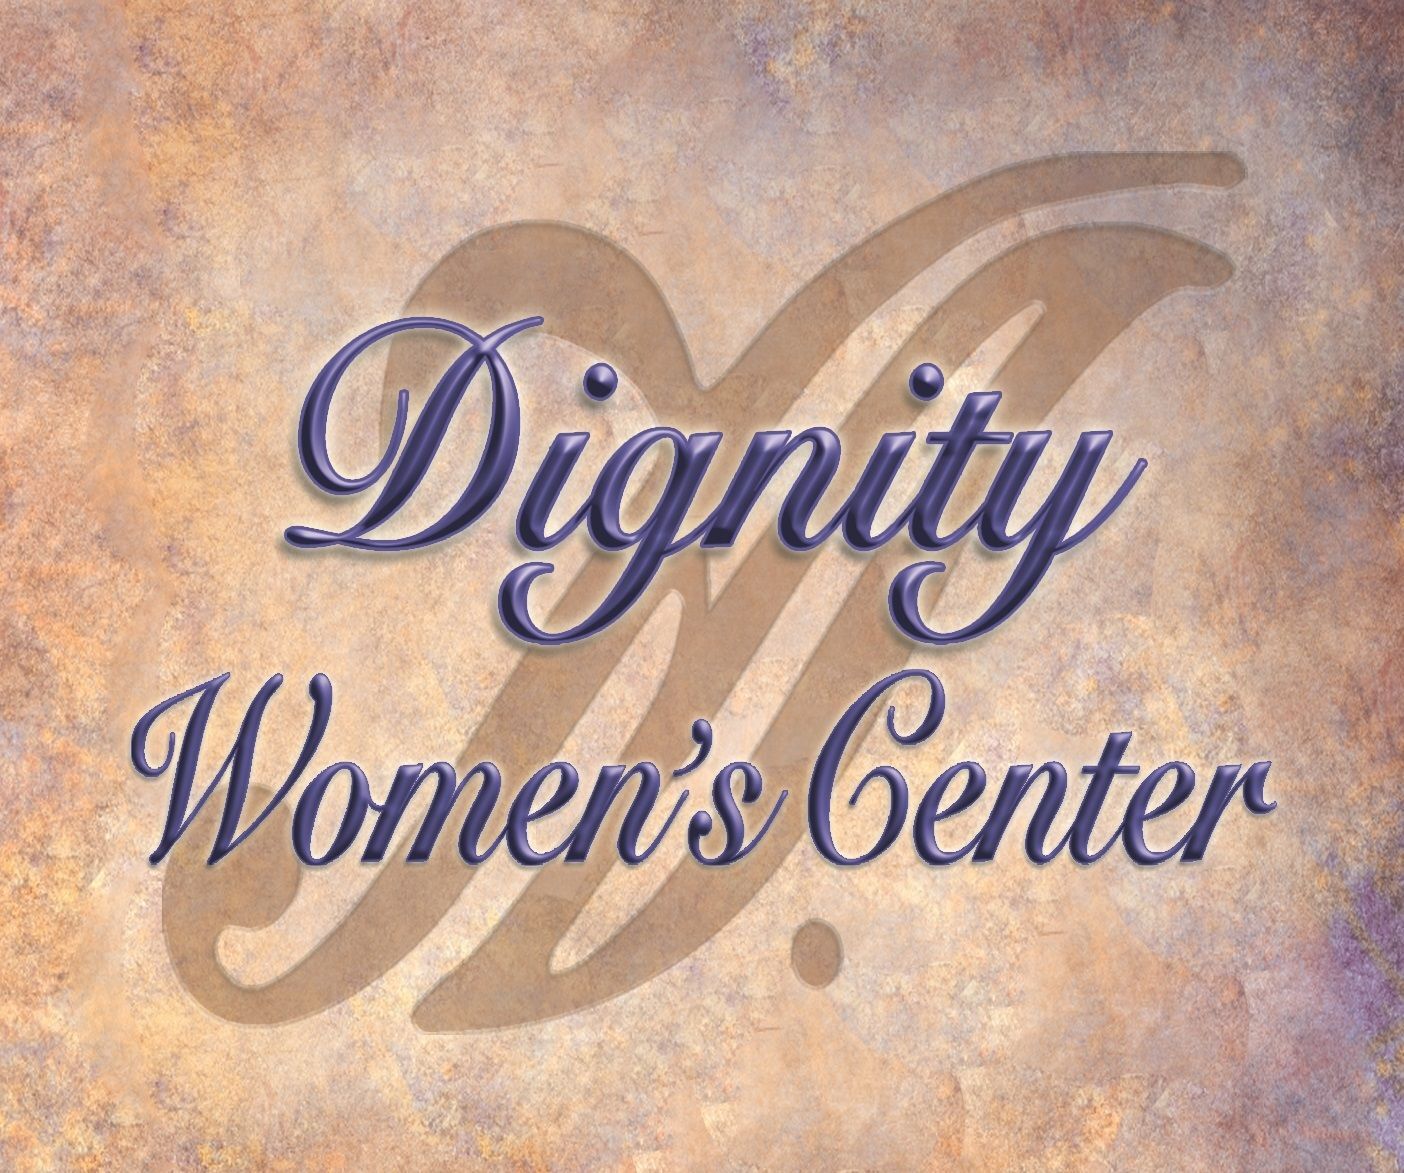 Dignity Women's Center